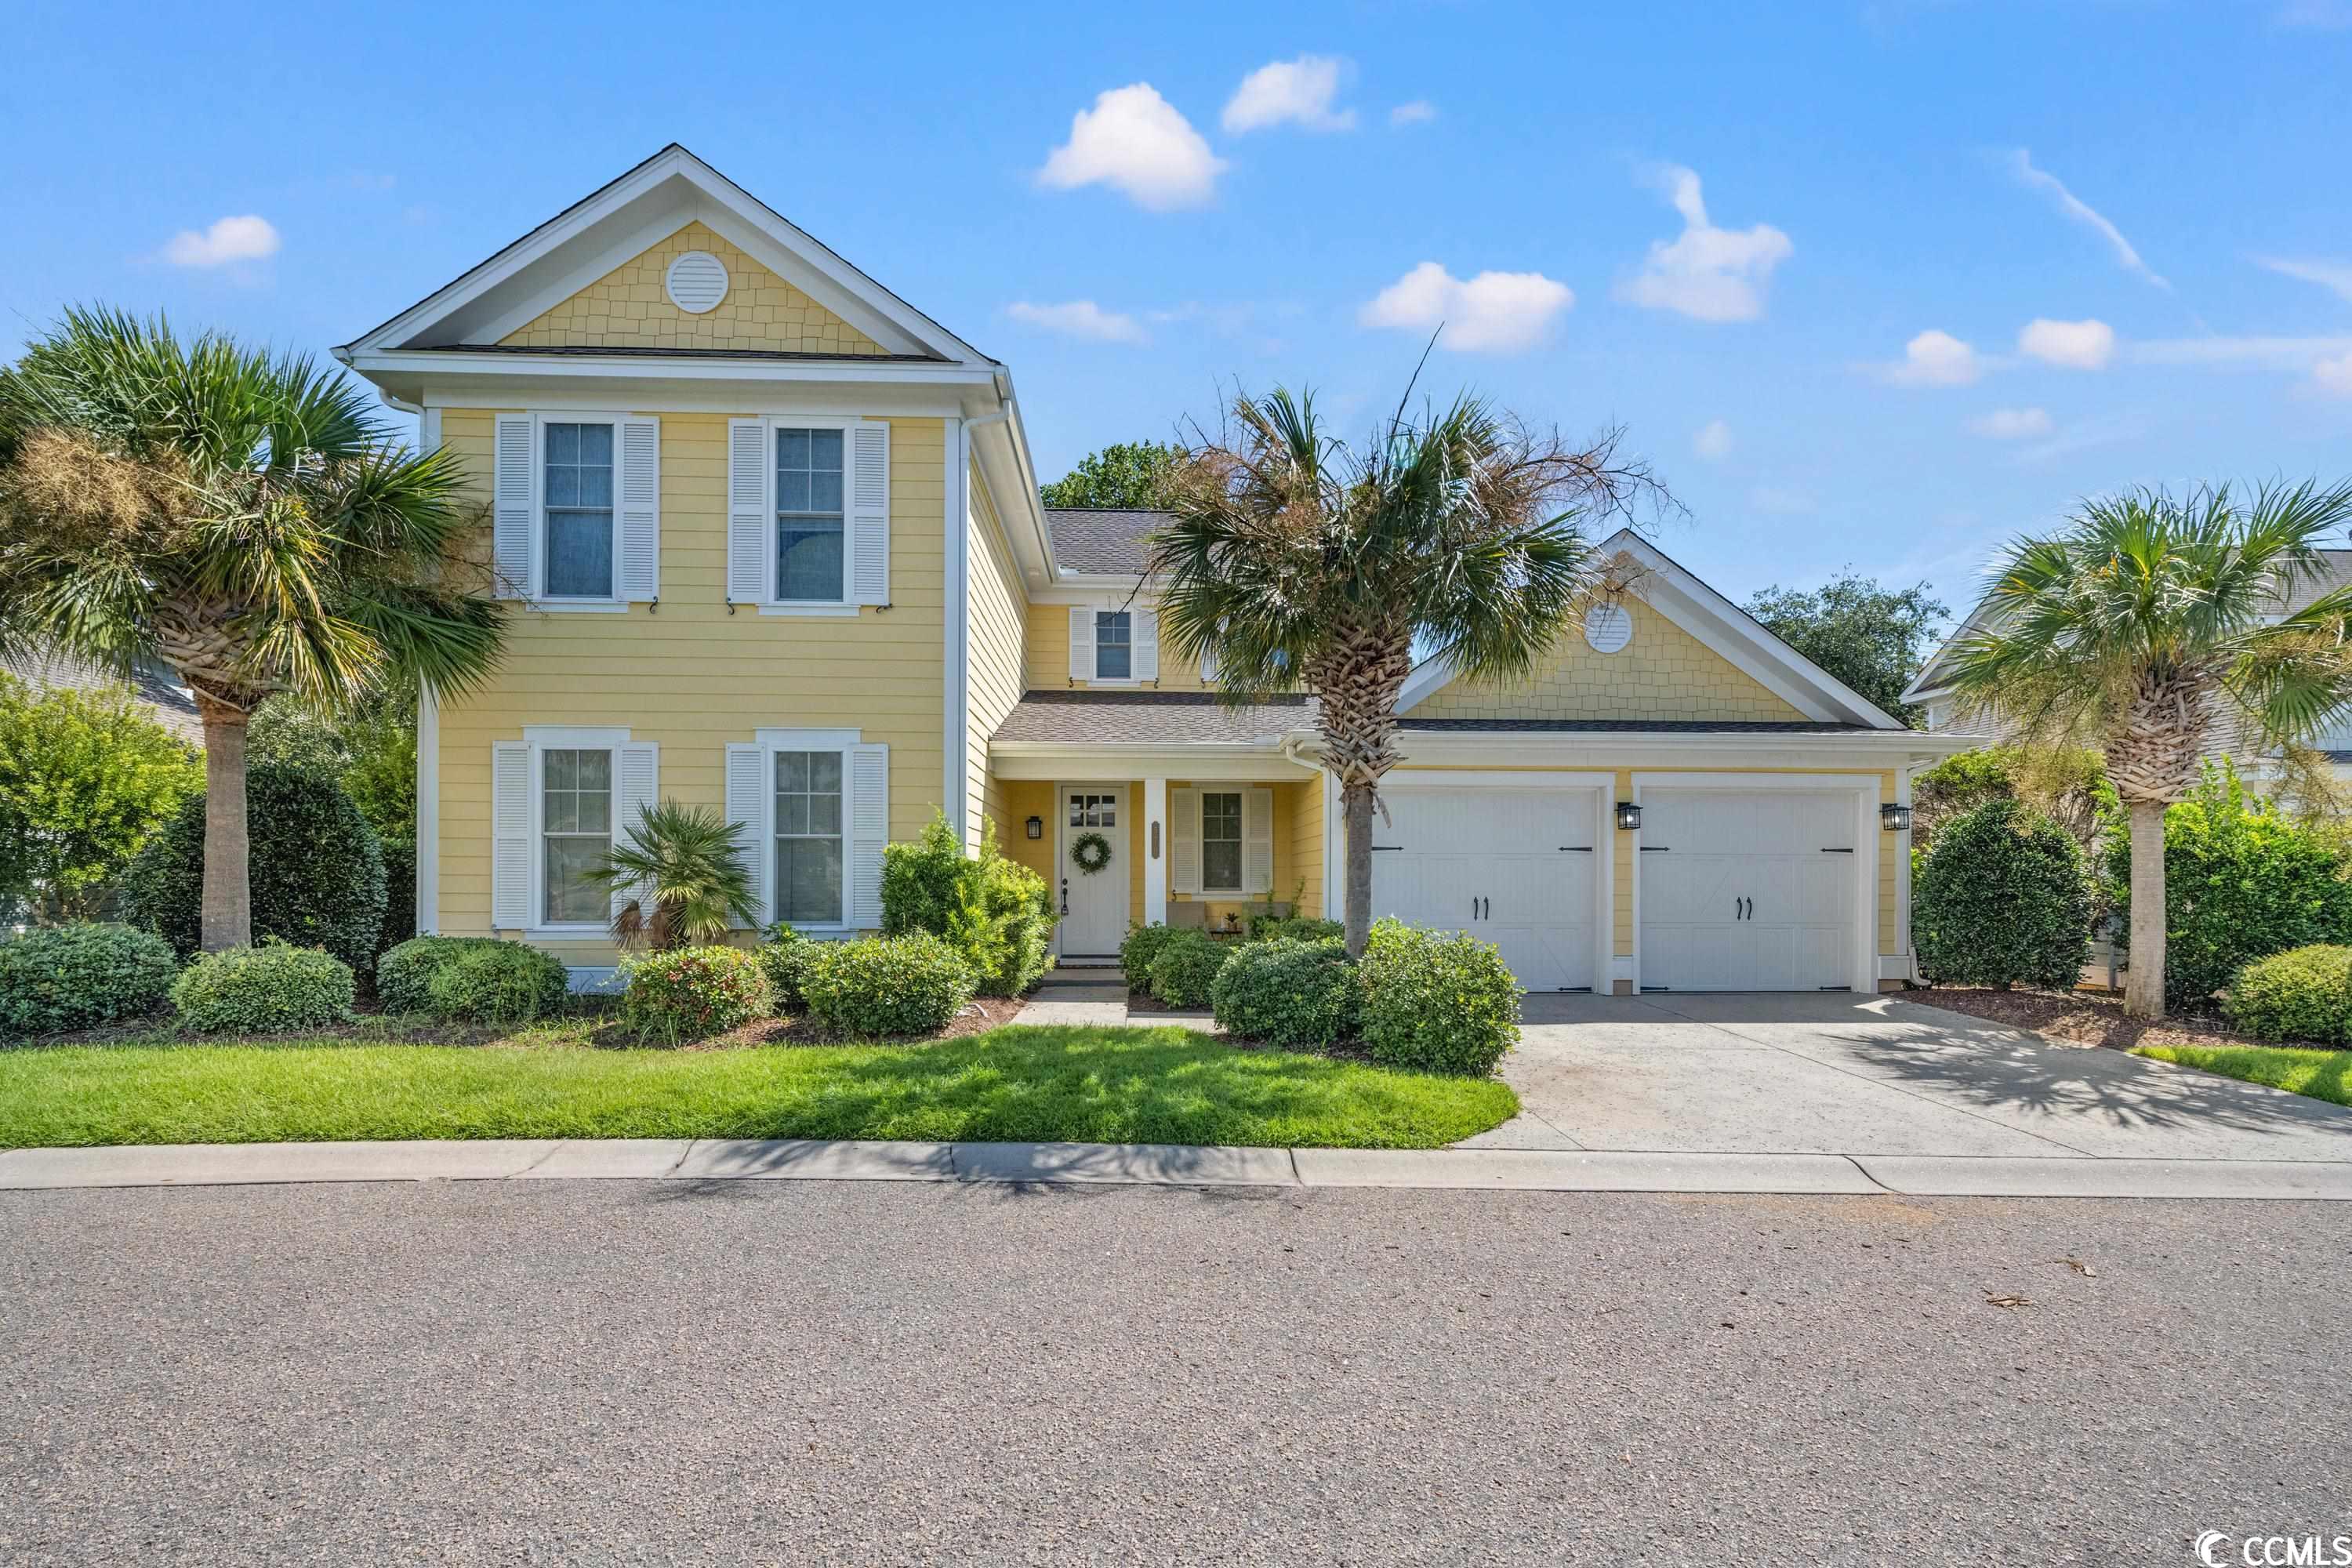 570 Olde Mill Dr. North Myrtle Beach, SC 29582